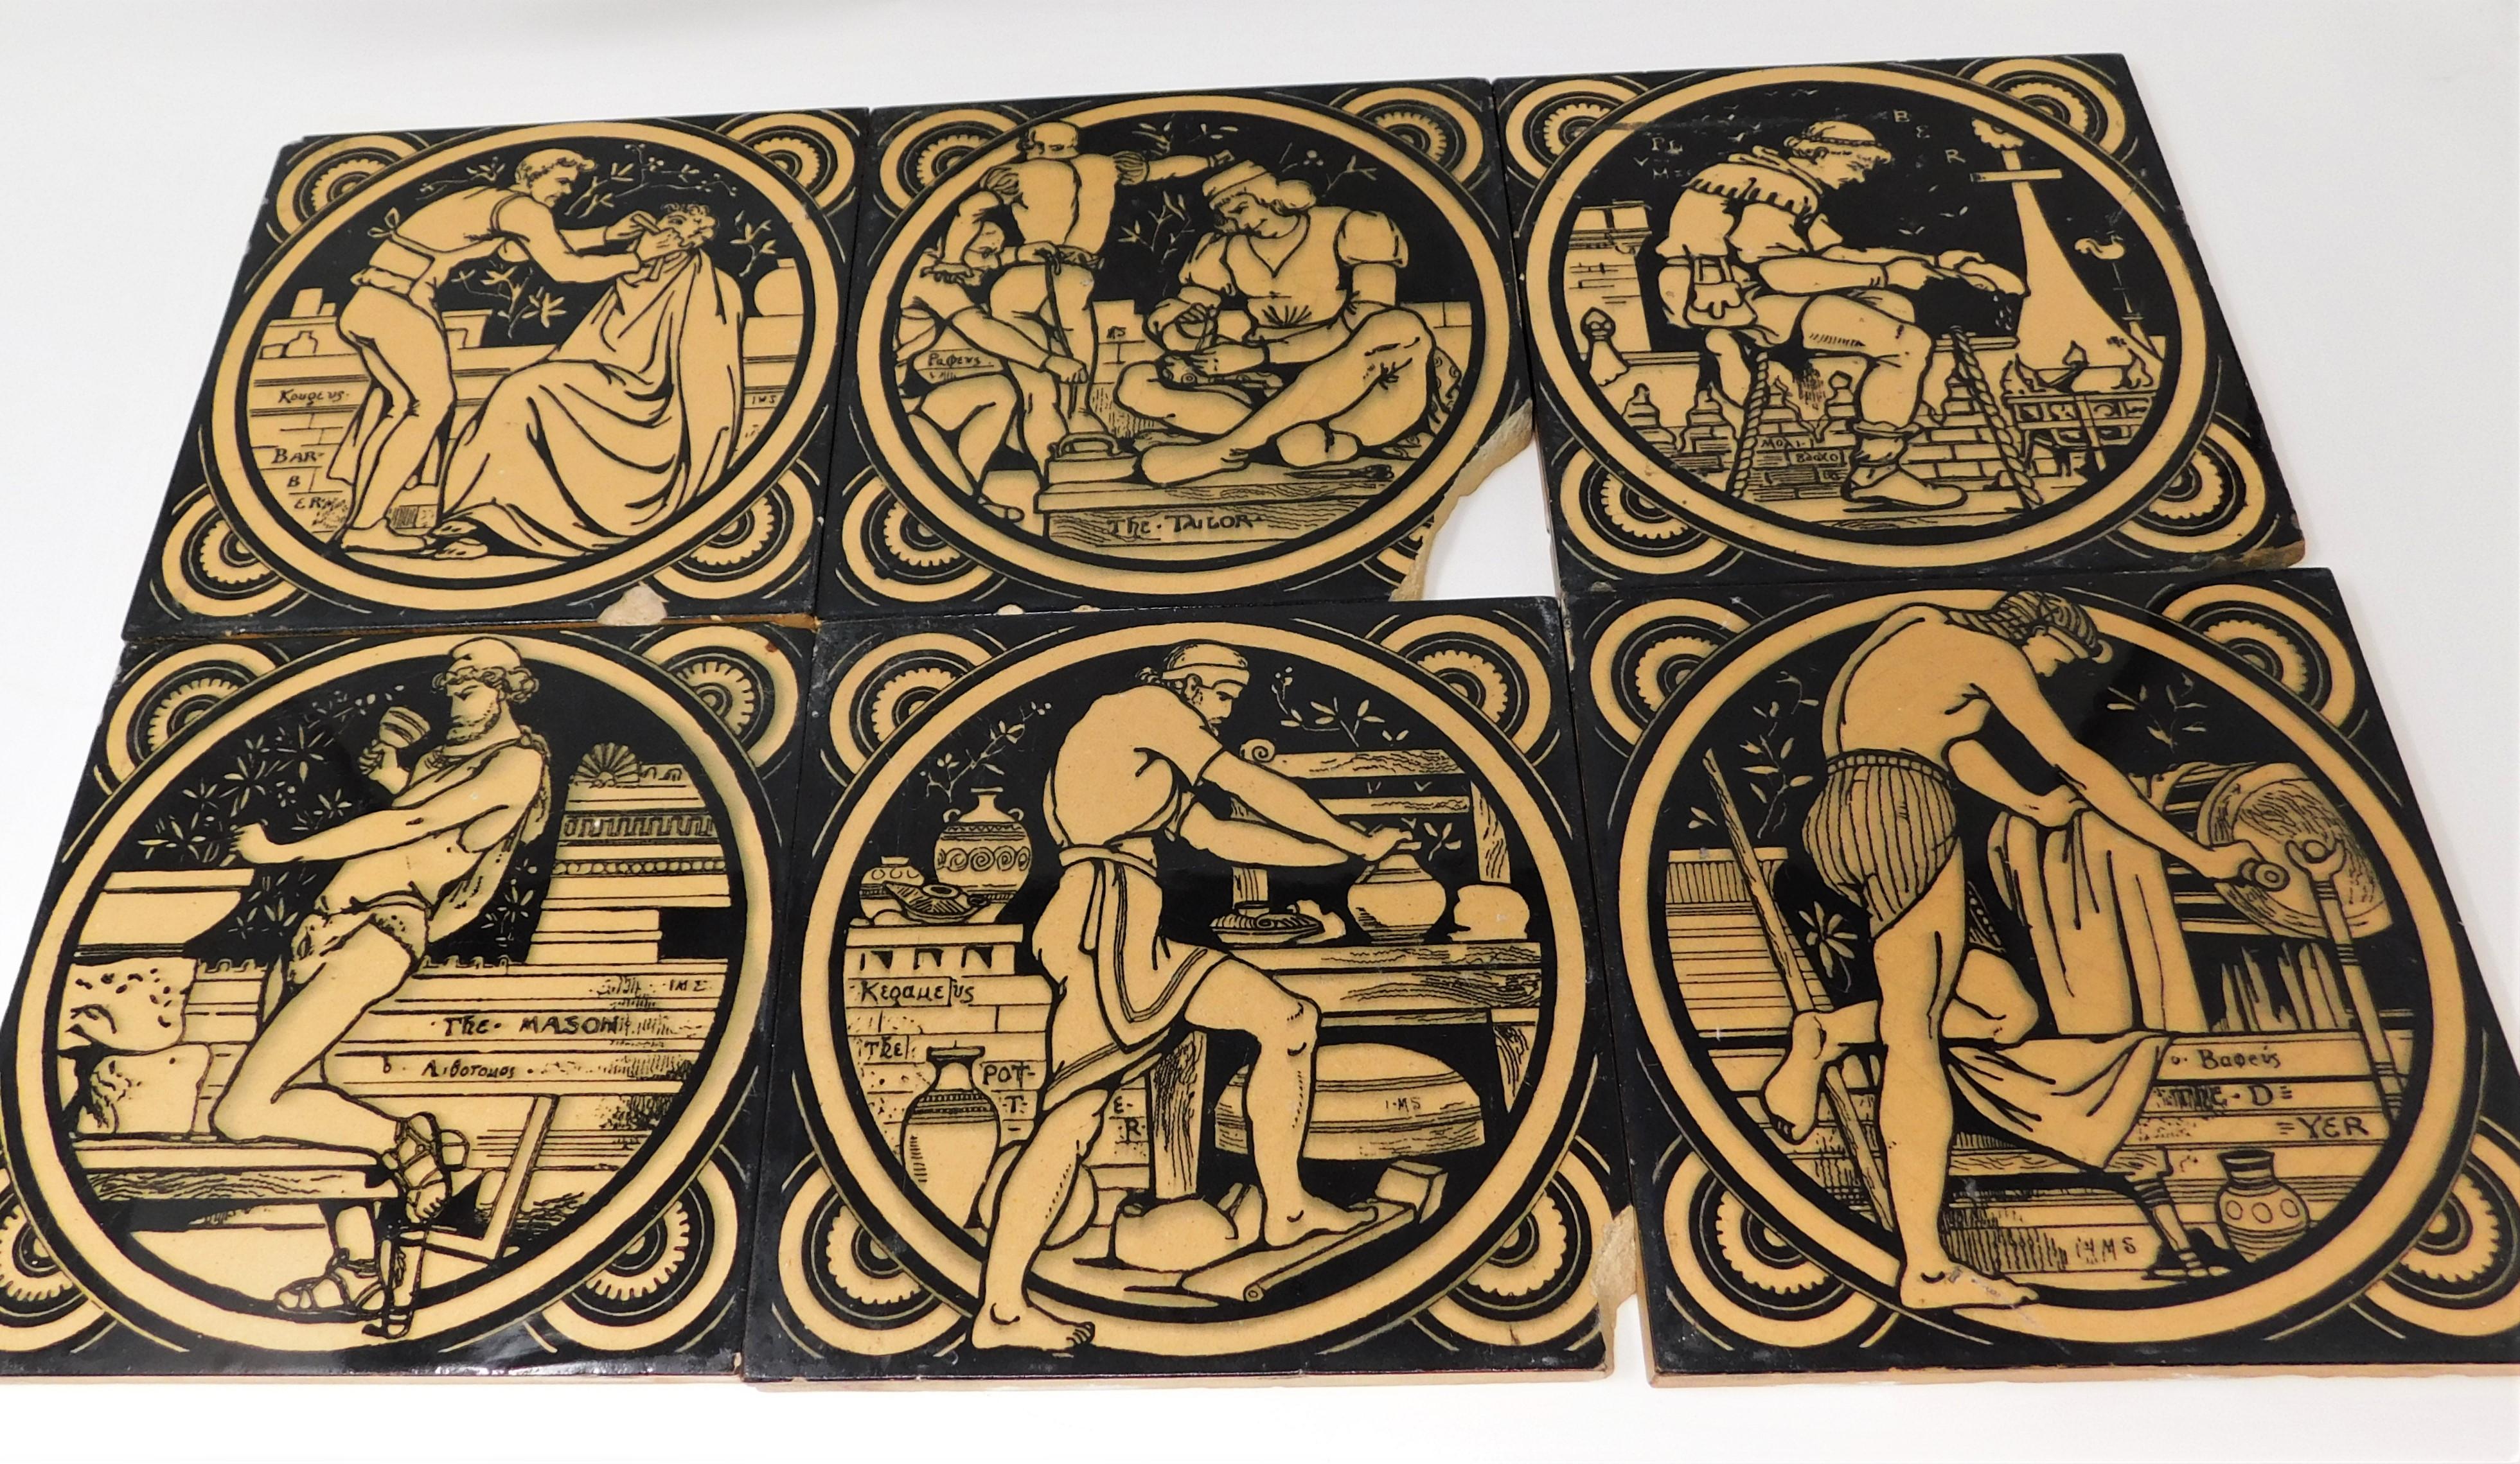 A set of six (one bonus tile thrown in of a double but in bad condition) Victorian hand painted Minton China Works in Stoke-upon-Trent, England, English tiles designed by John Moyr Smith with scenes depicting The Tailor, The Potter, The Mason, The